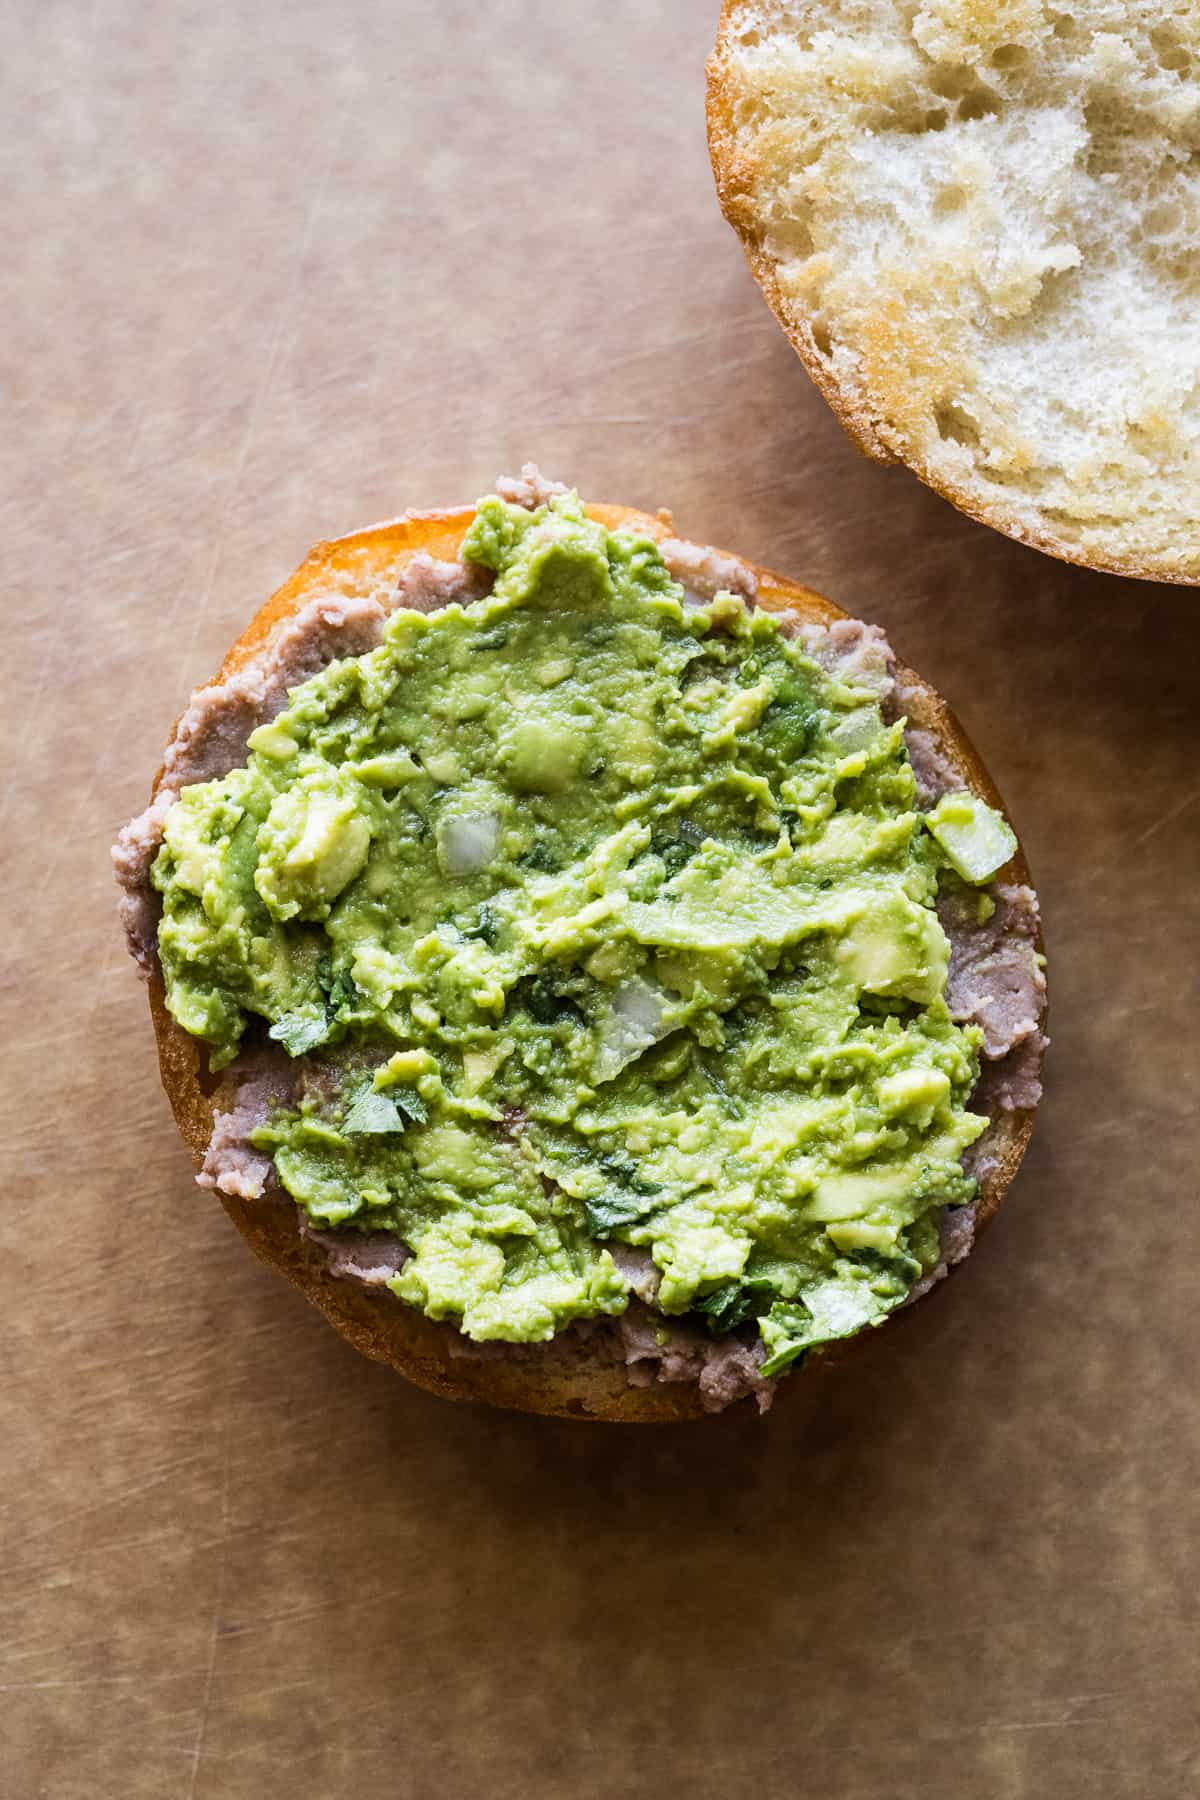 Refried beans and guacamole smeared on a telera roll.